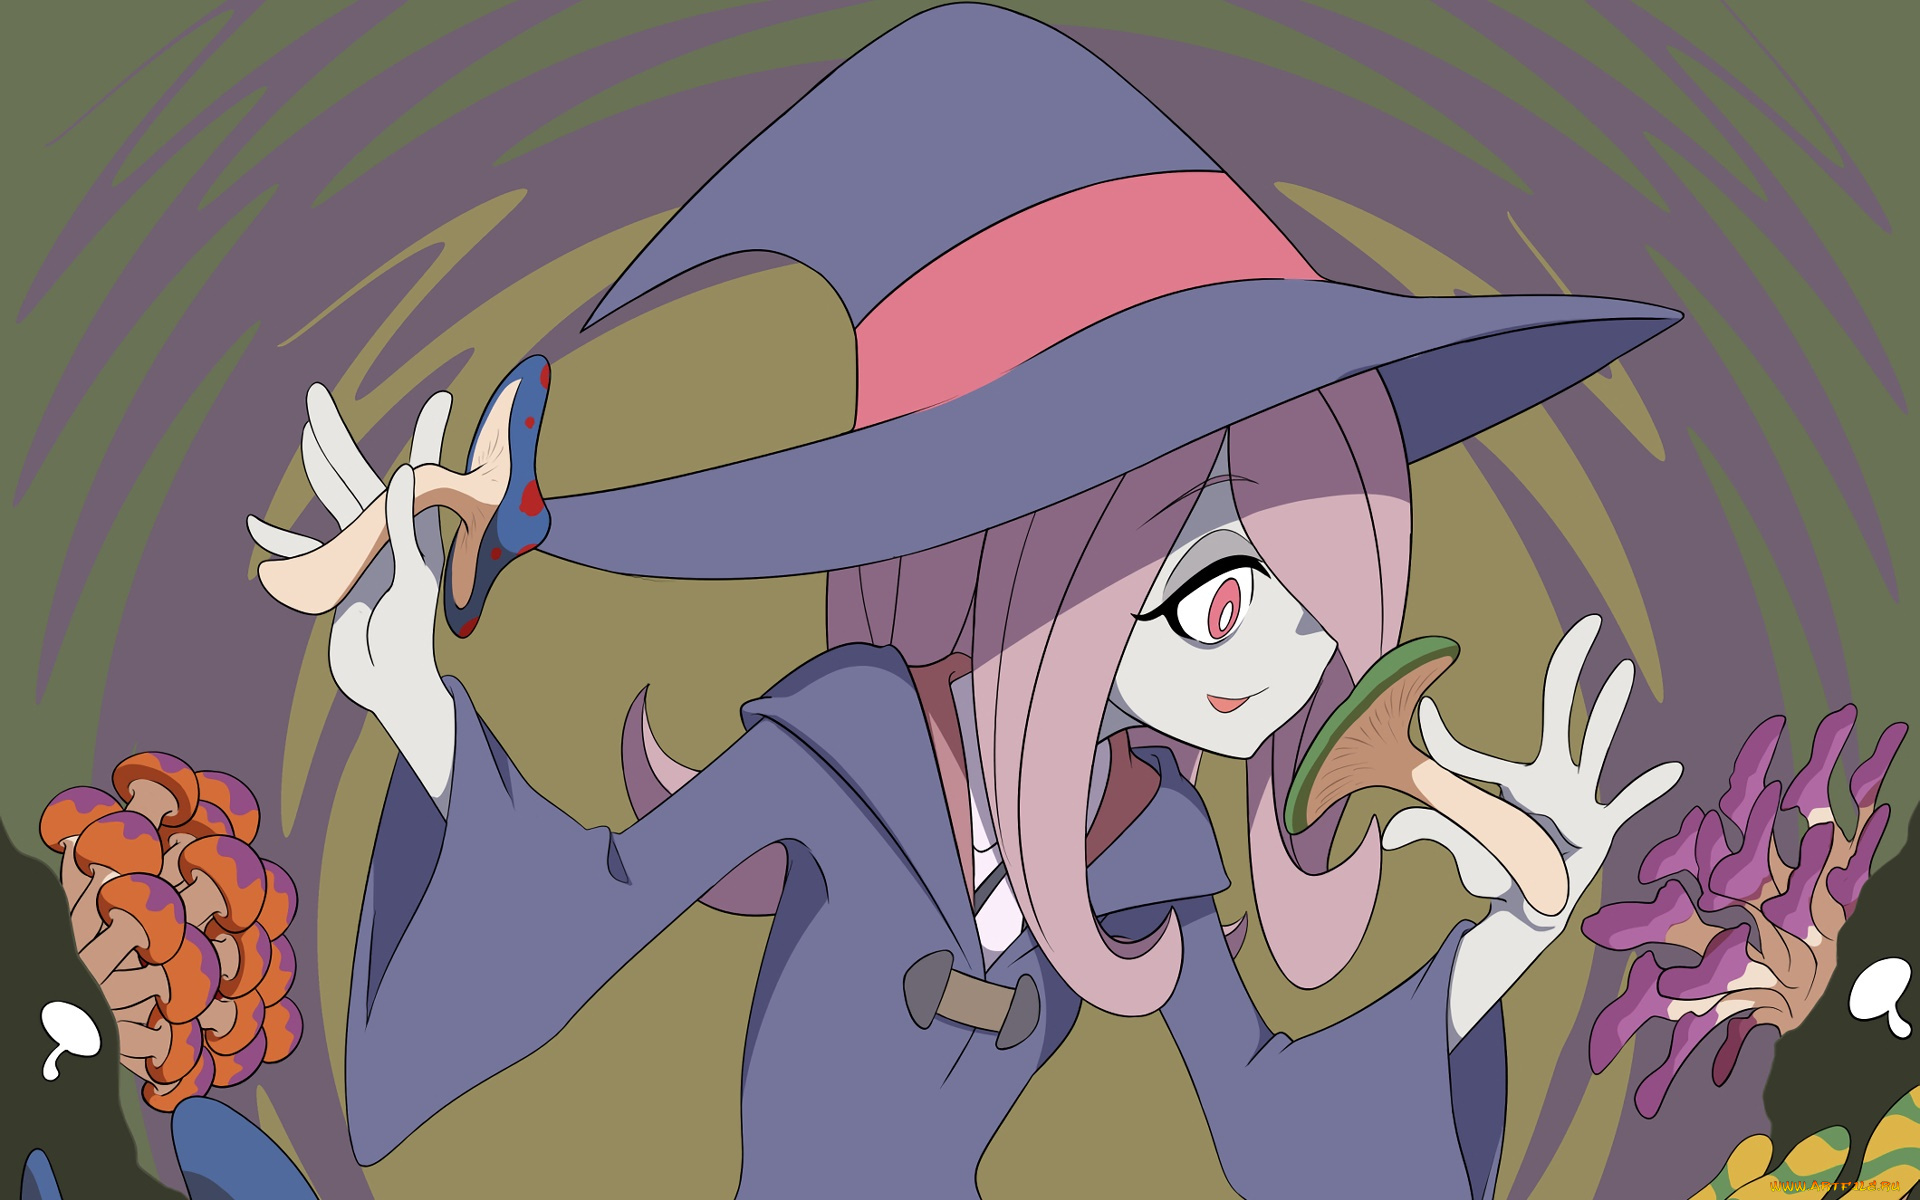 little, witch, academia, аниме, фон, взгляд, девушка